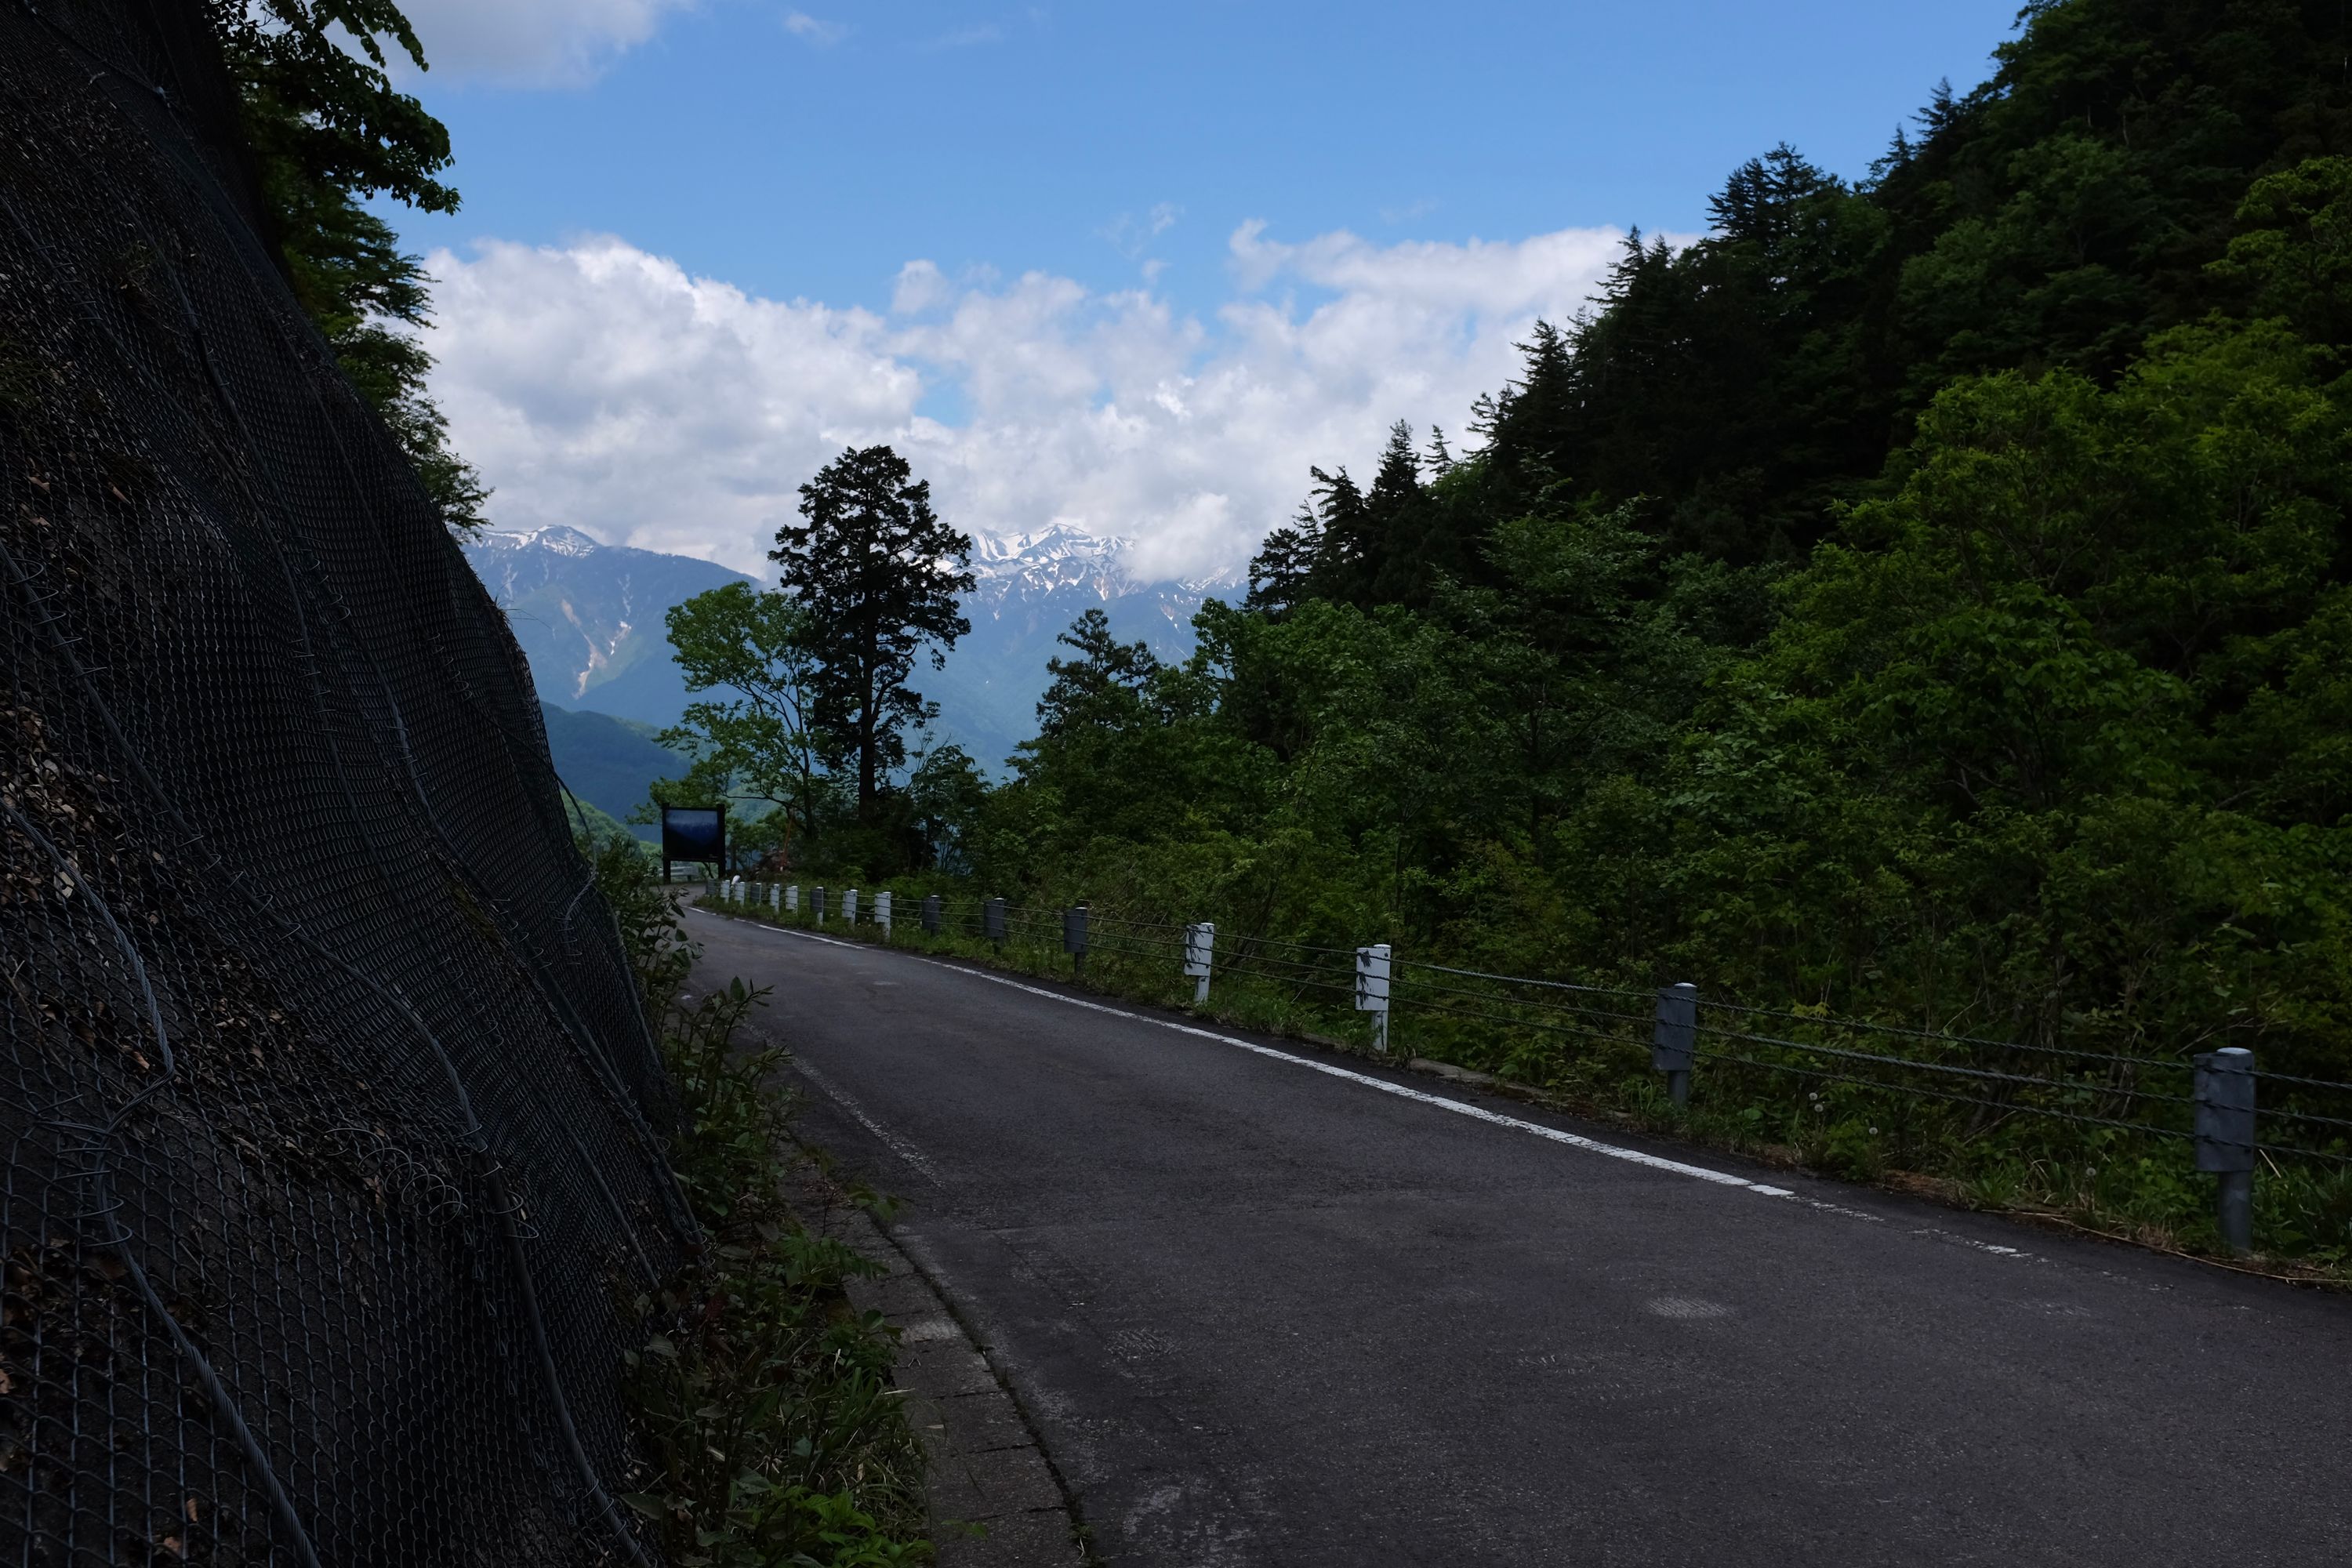 A narrow road cuts through a forest, the peaks of Hakusan visible behind it.